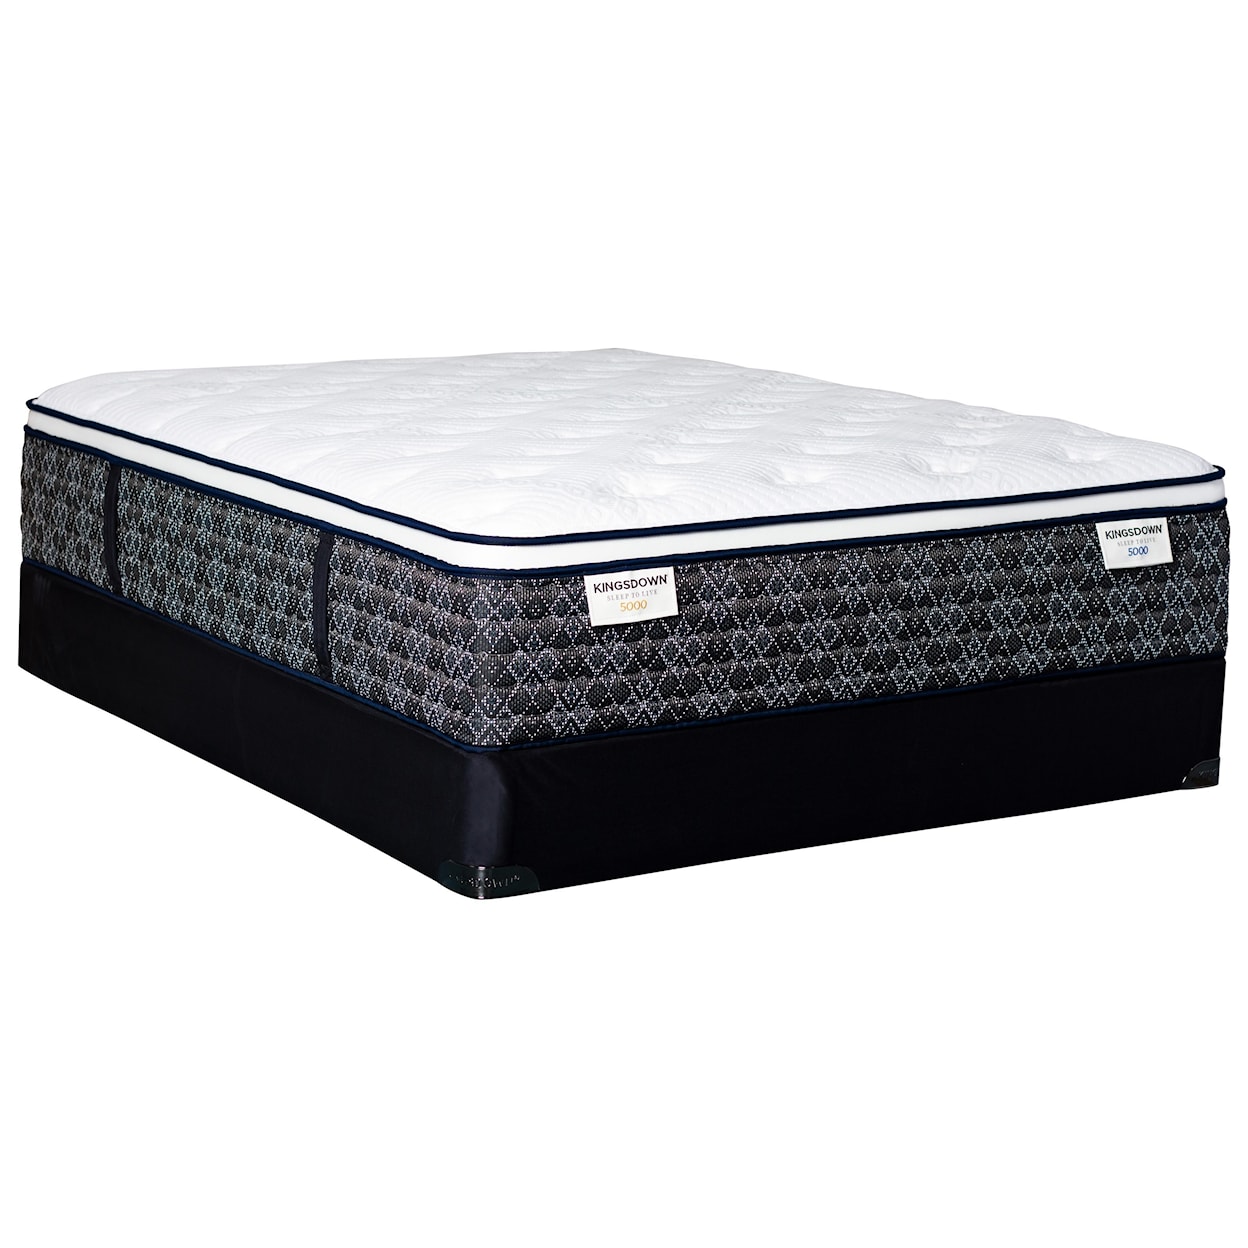 Kingsdown Sleep to Live 5000 Green Red ET Queen Pocketed Coil Mattress Set